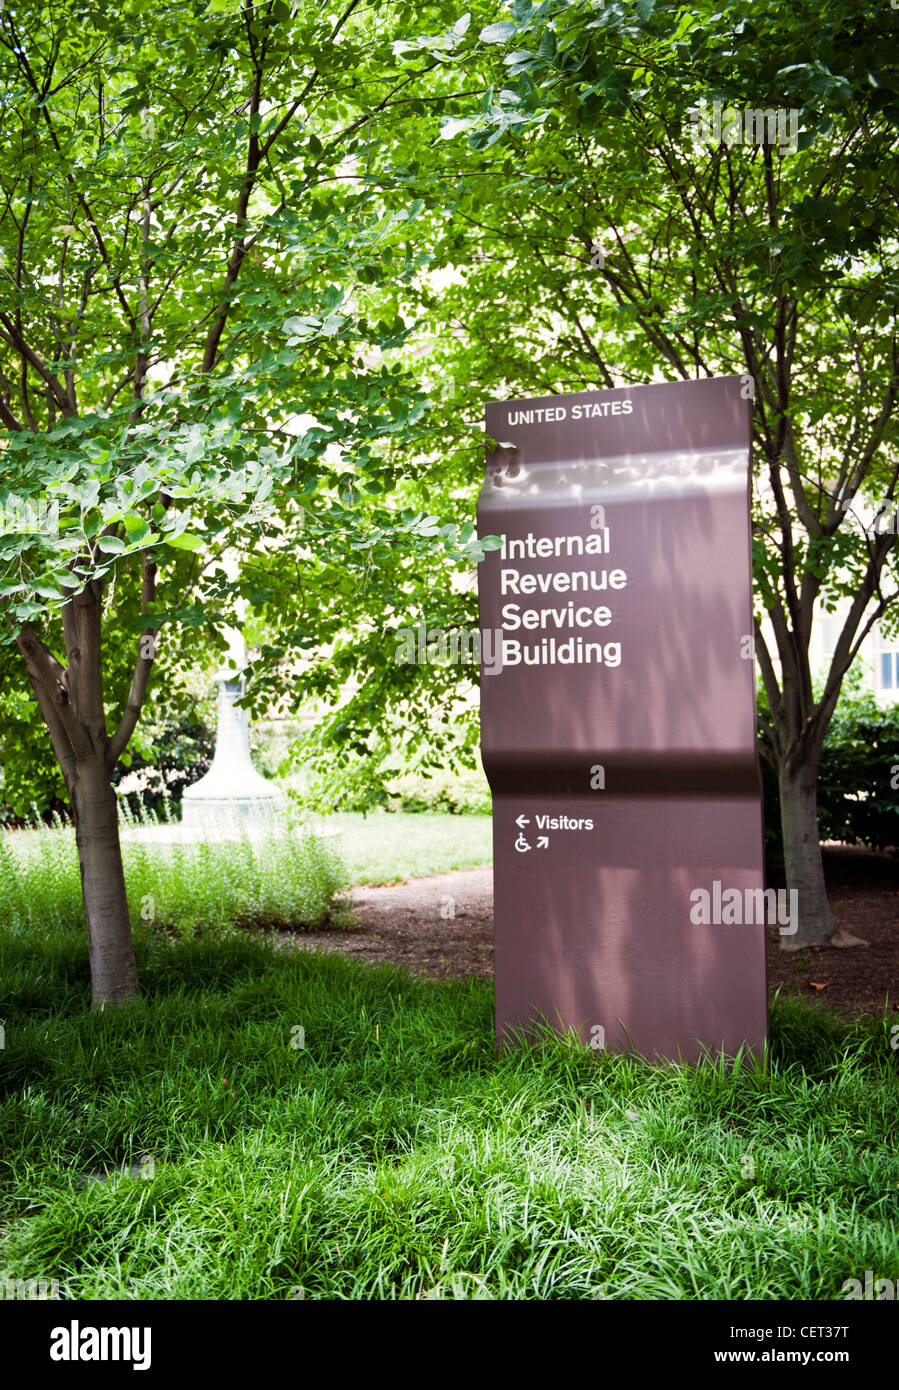 A Sign for the Internal Revenue Service IRS in Washington D.C. Stock Photo